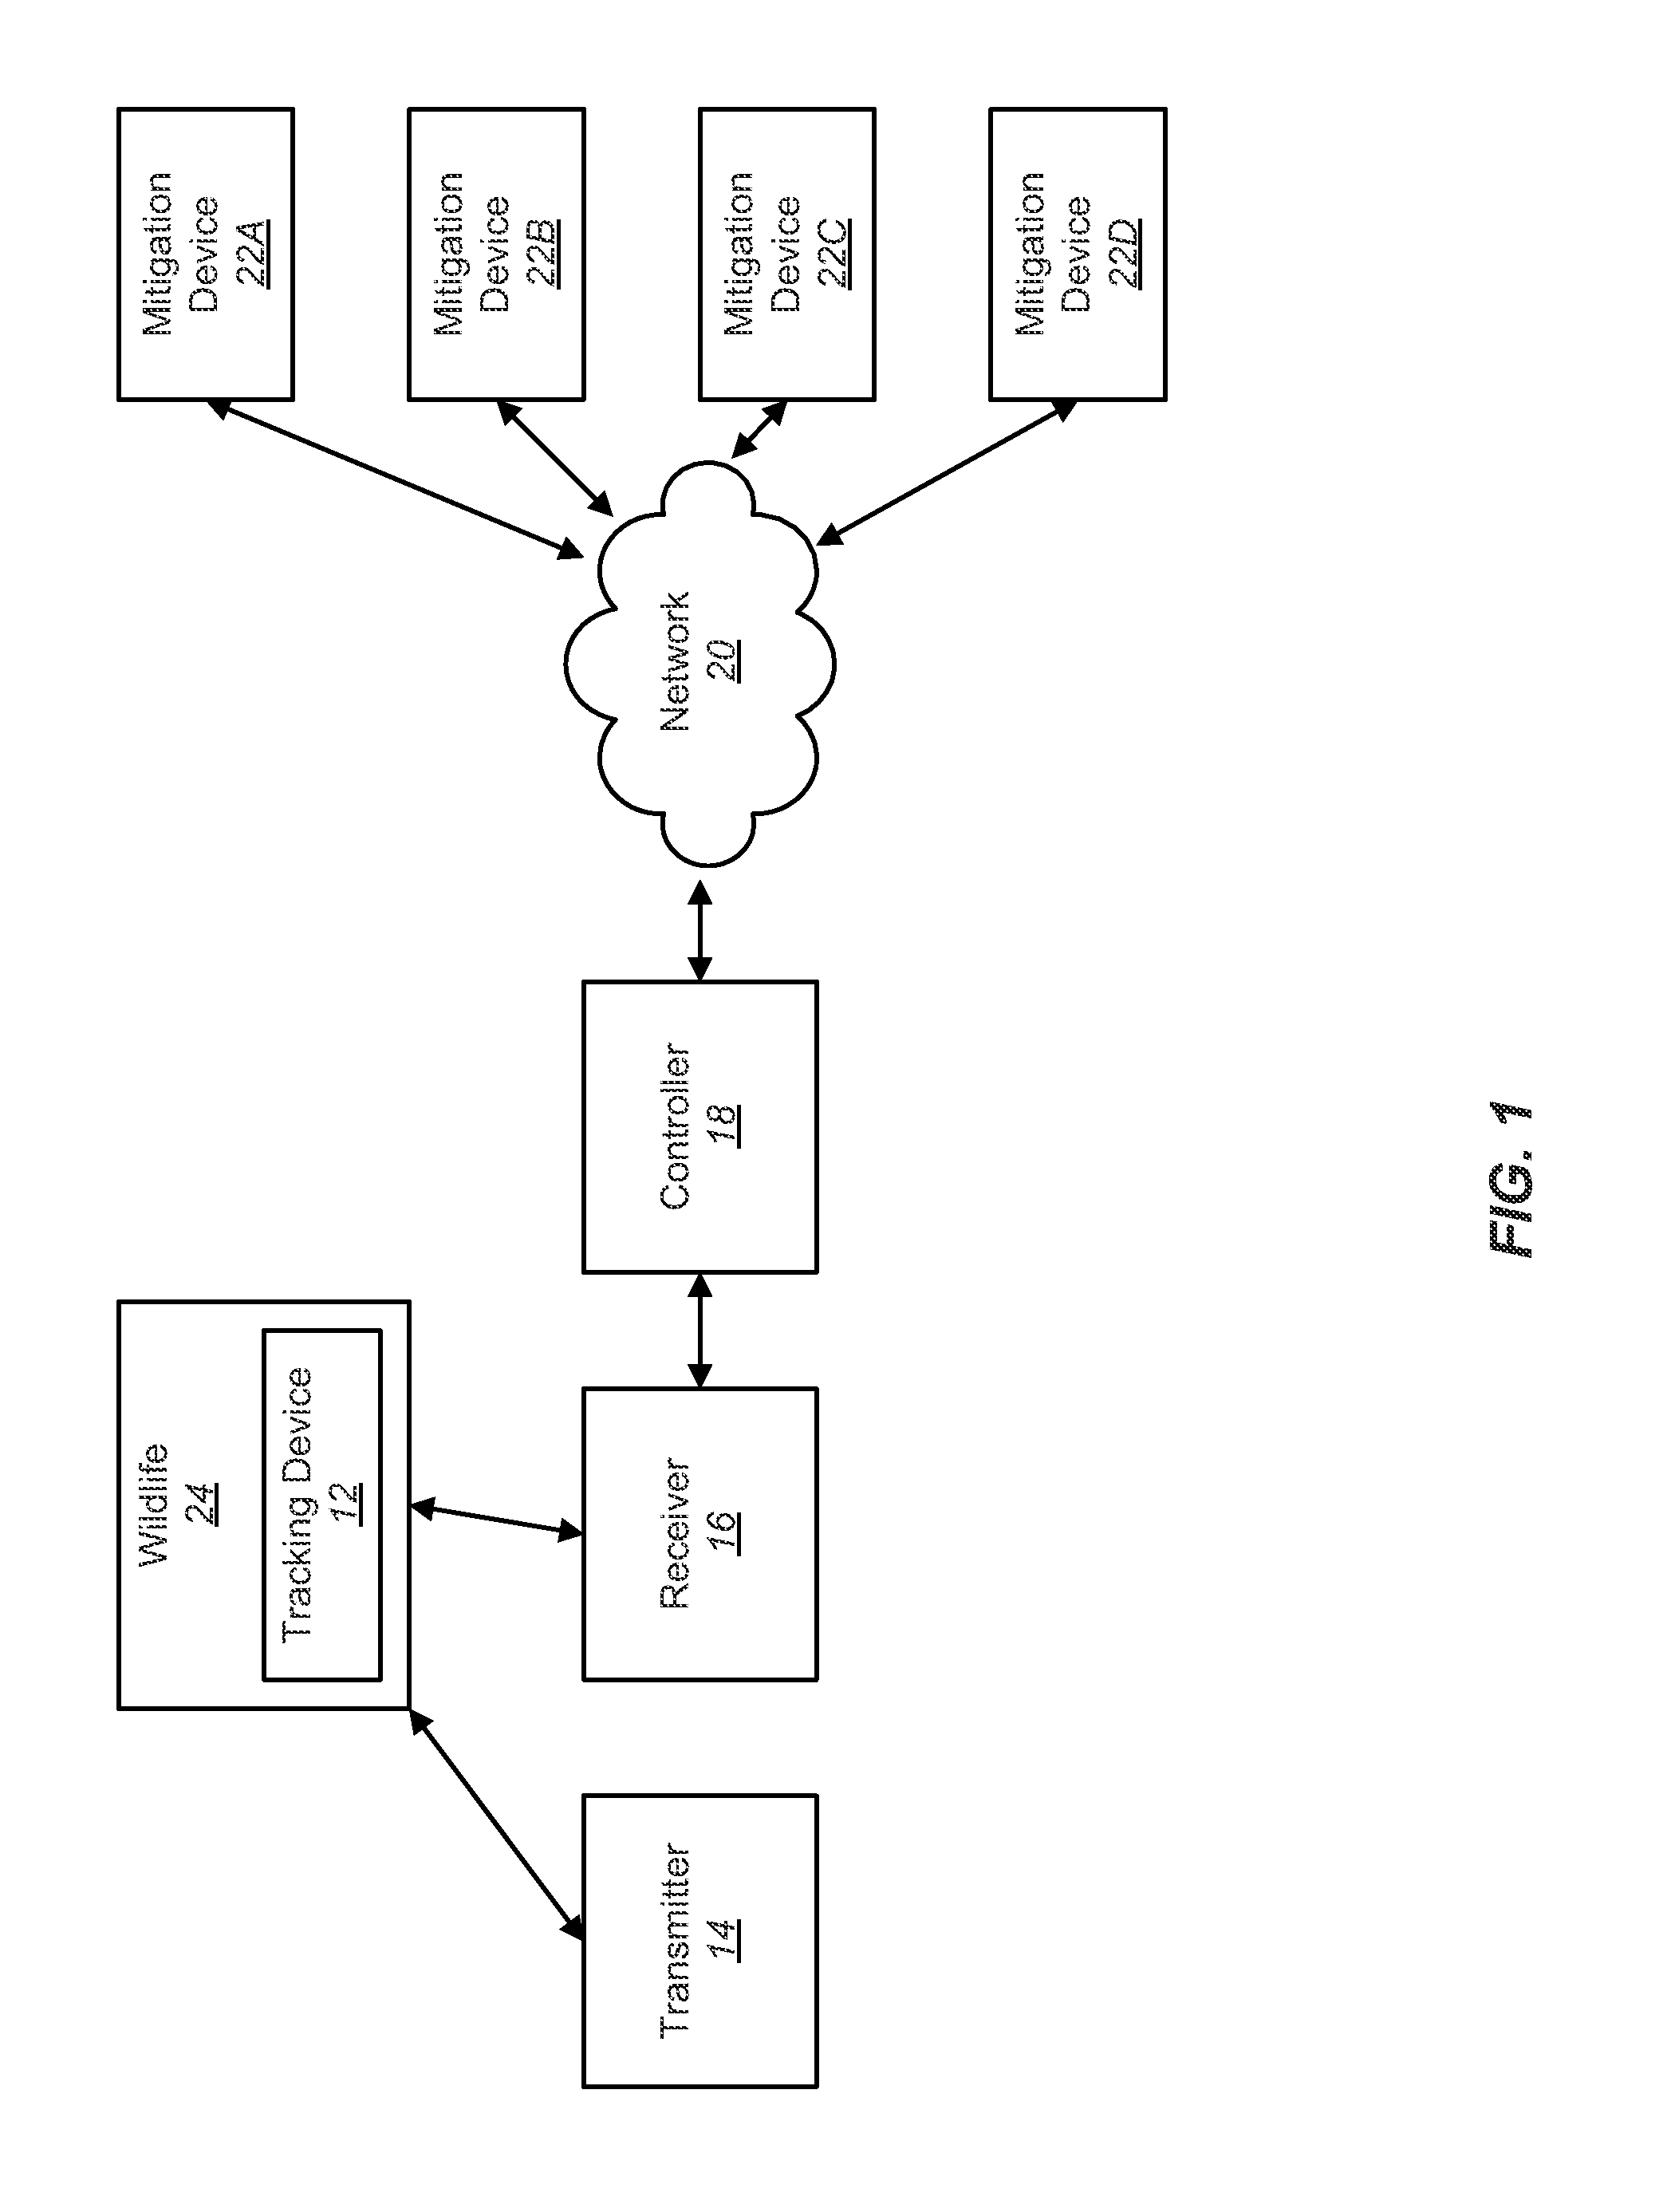 Systems and methods for avian mitigation for wind farms